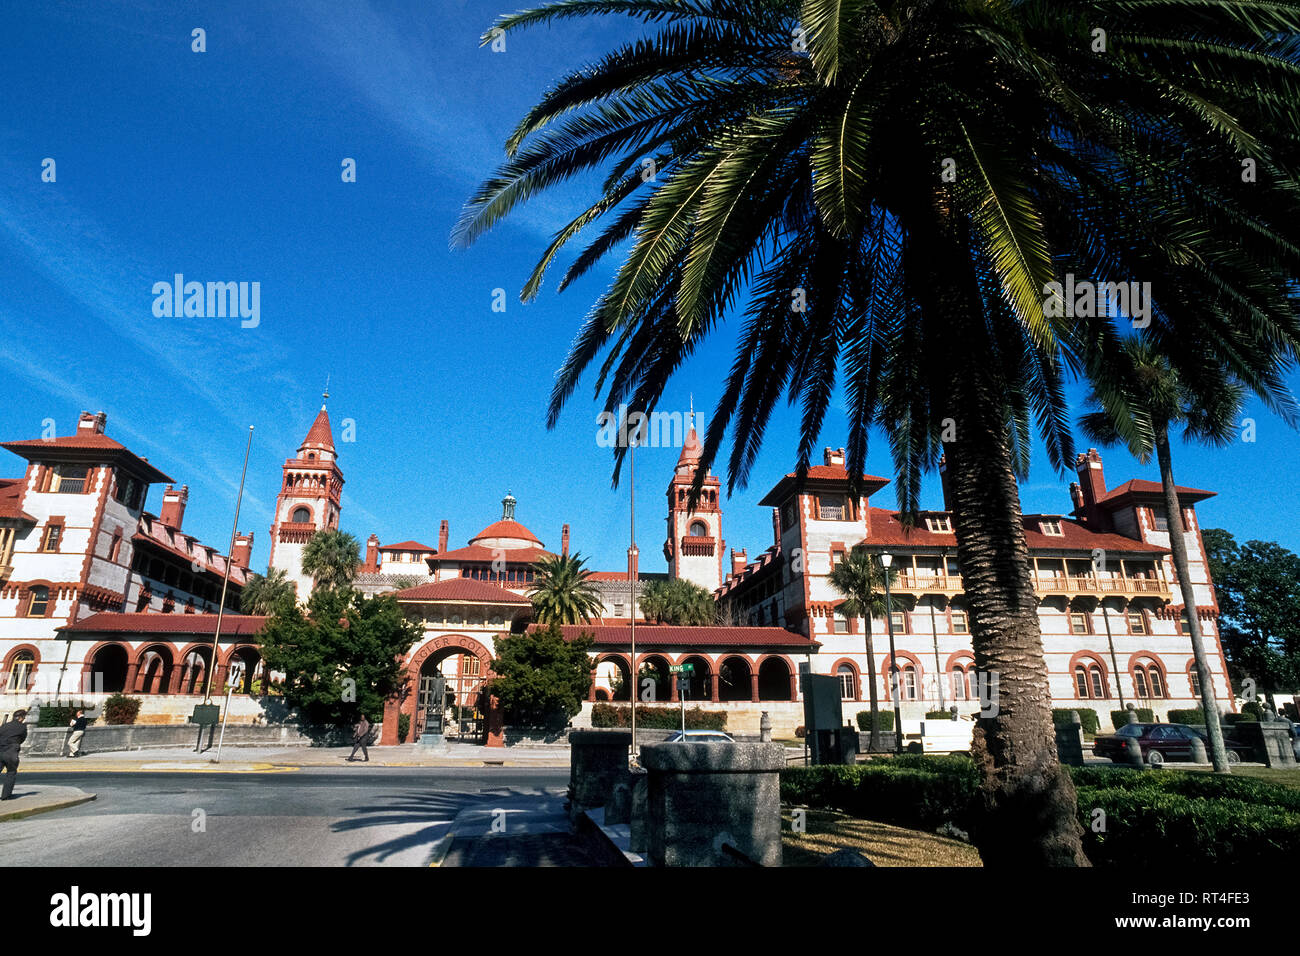 The historic 1885 Ponce De Leon Hotel is now an architectural attraction on the 47-acre (19 hectares) campus of Flagler College, a liberal arts school founded in 1968 in the heart of St. Augustine, Florida, USA. Built by American industrialist Henry M. Flagler (1830-1913), the sprawling Spanish Renaissance-style building was one of the first luxurious resorts along Florida's Atlantic Coast. After becoming wealthy as a founder of Standard Oil, Flagler became known for developing early tourism in the Sunshine State by building more grand hotels and the Florida East Coast Railway. Stock Photo